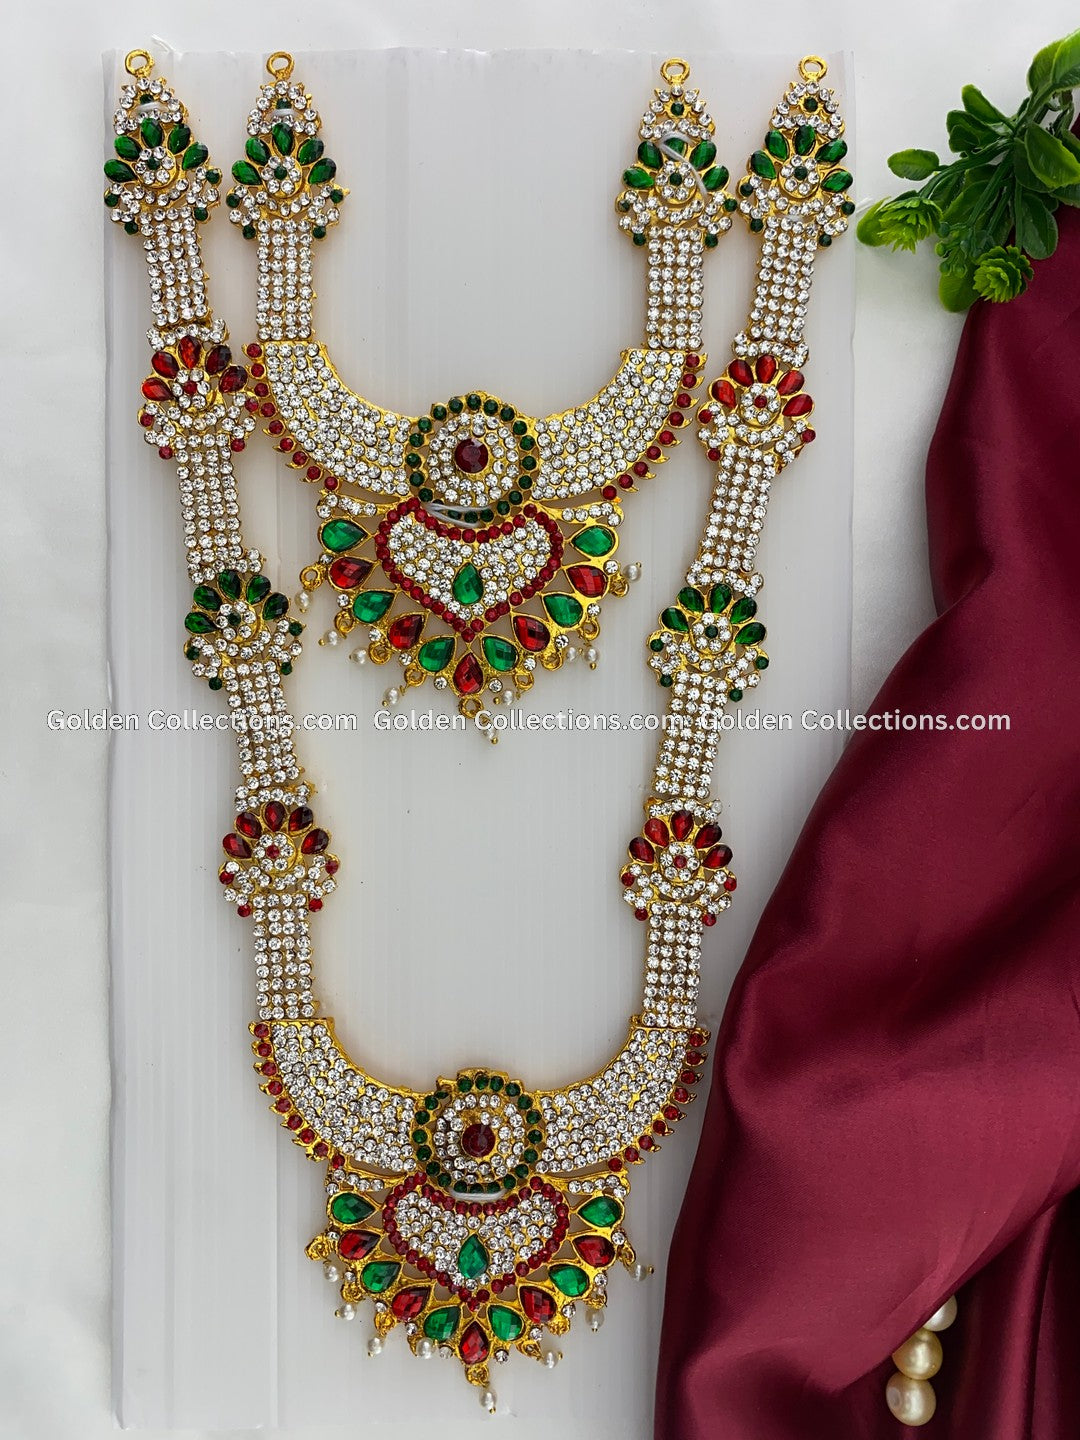 Adorn with Traditional Deity Ornaments-GoldenCollections